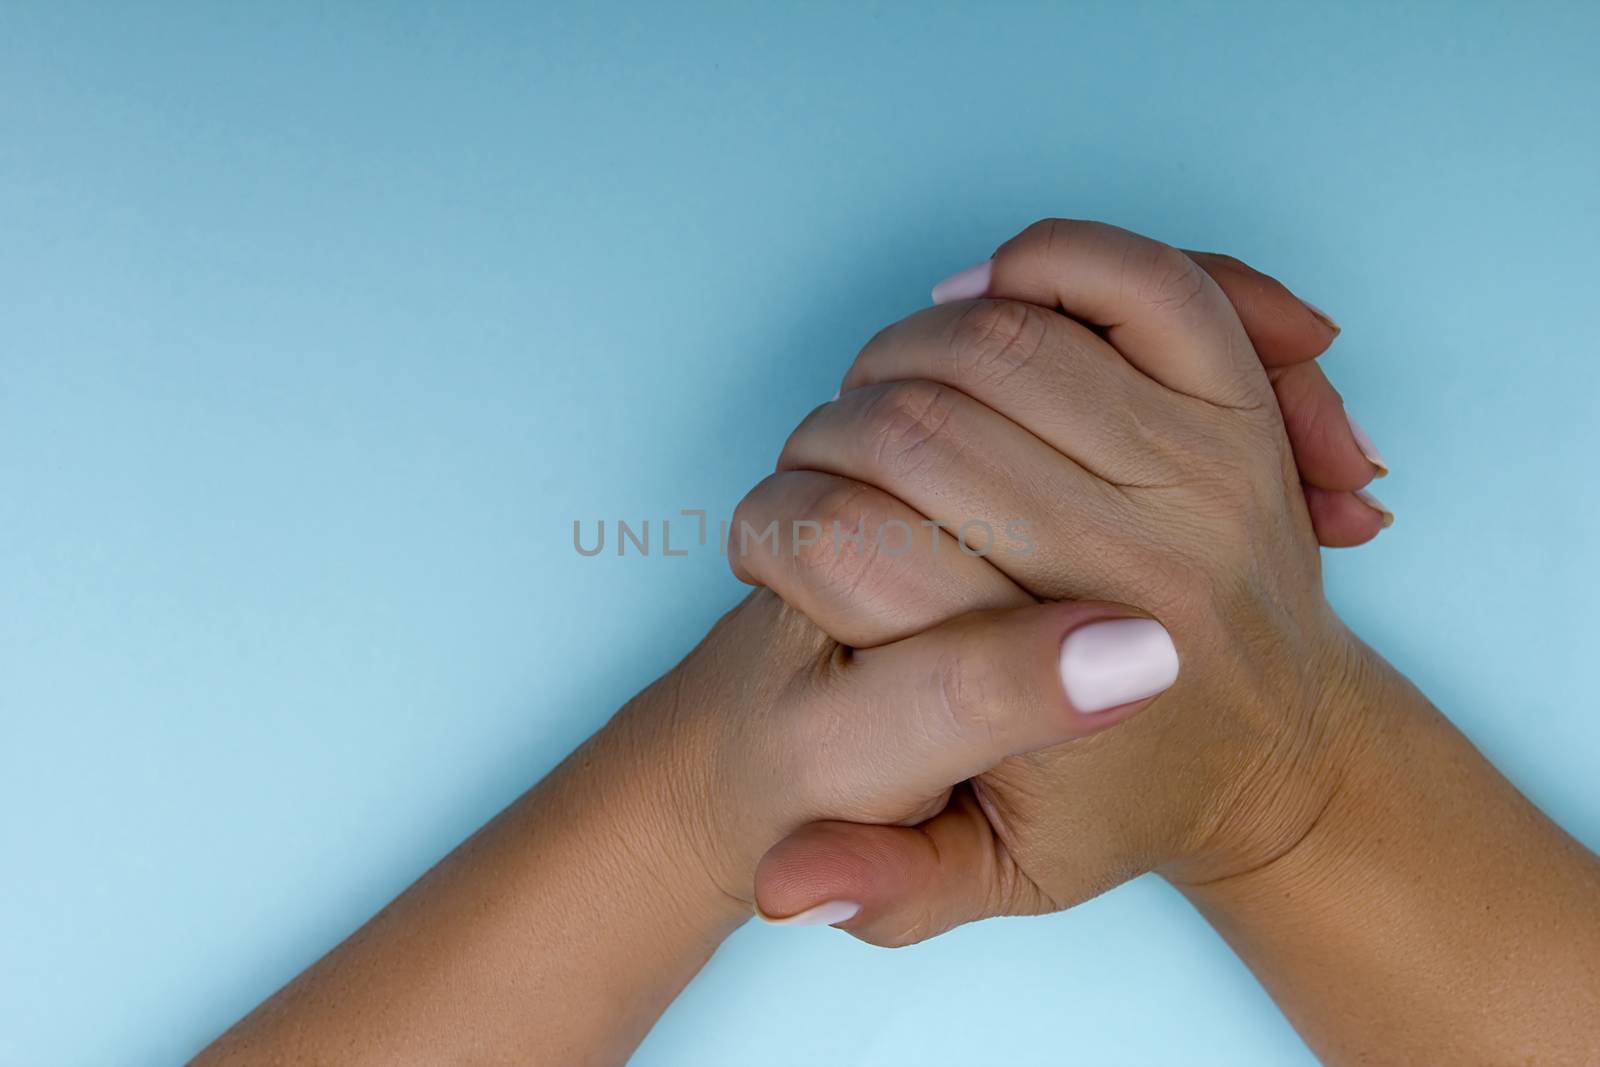 Folded female hands on a blue background